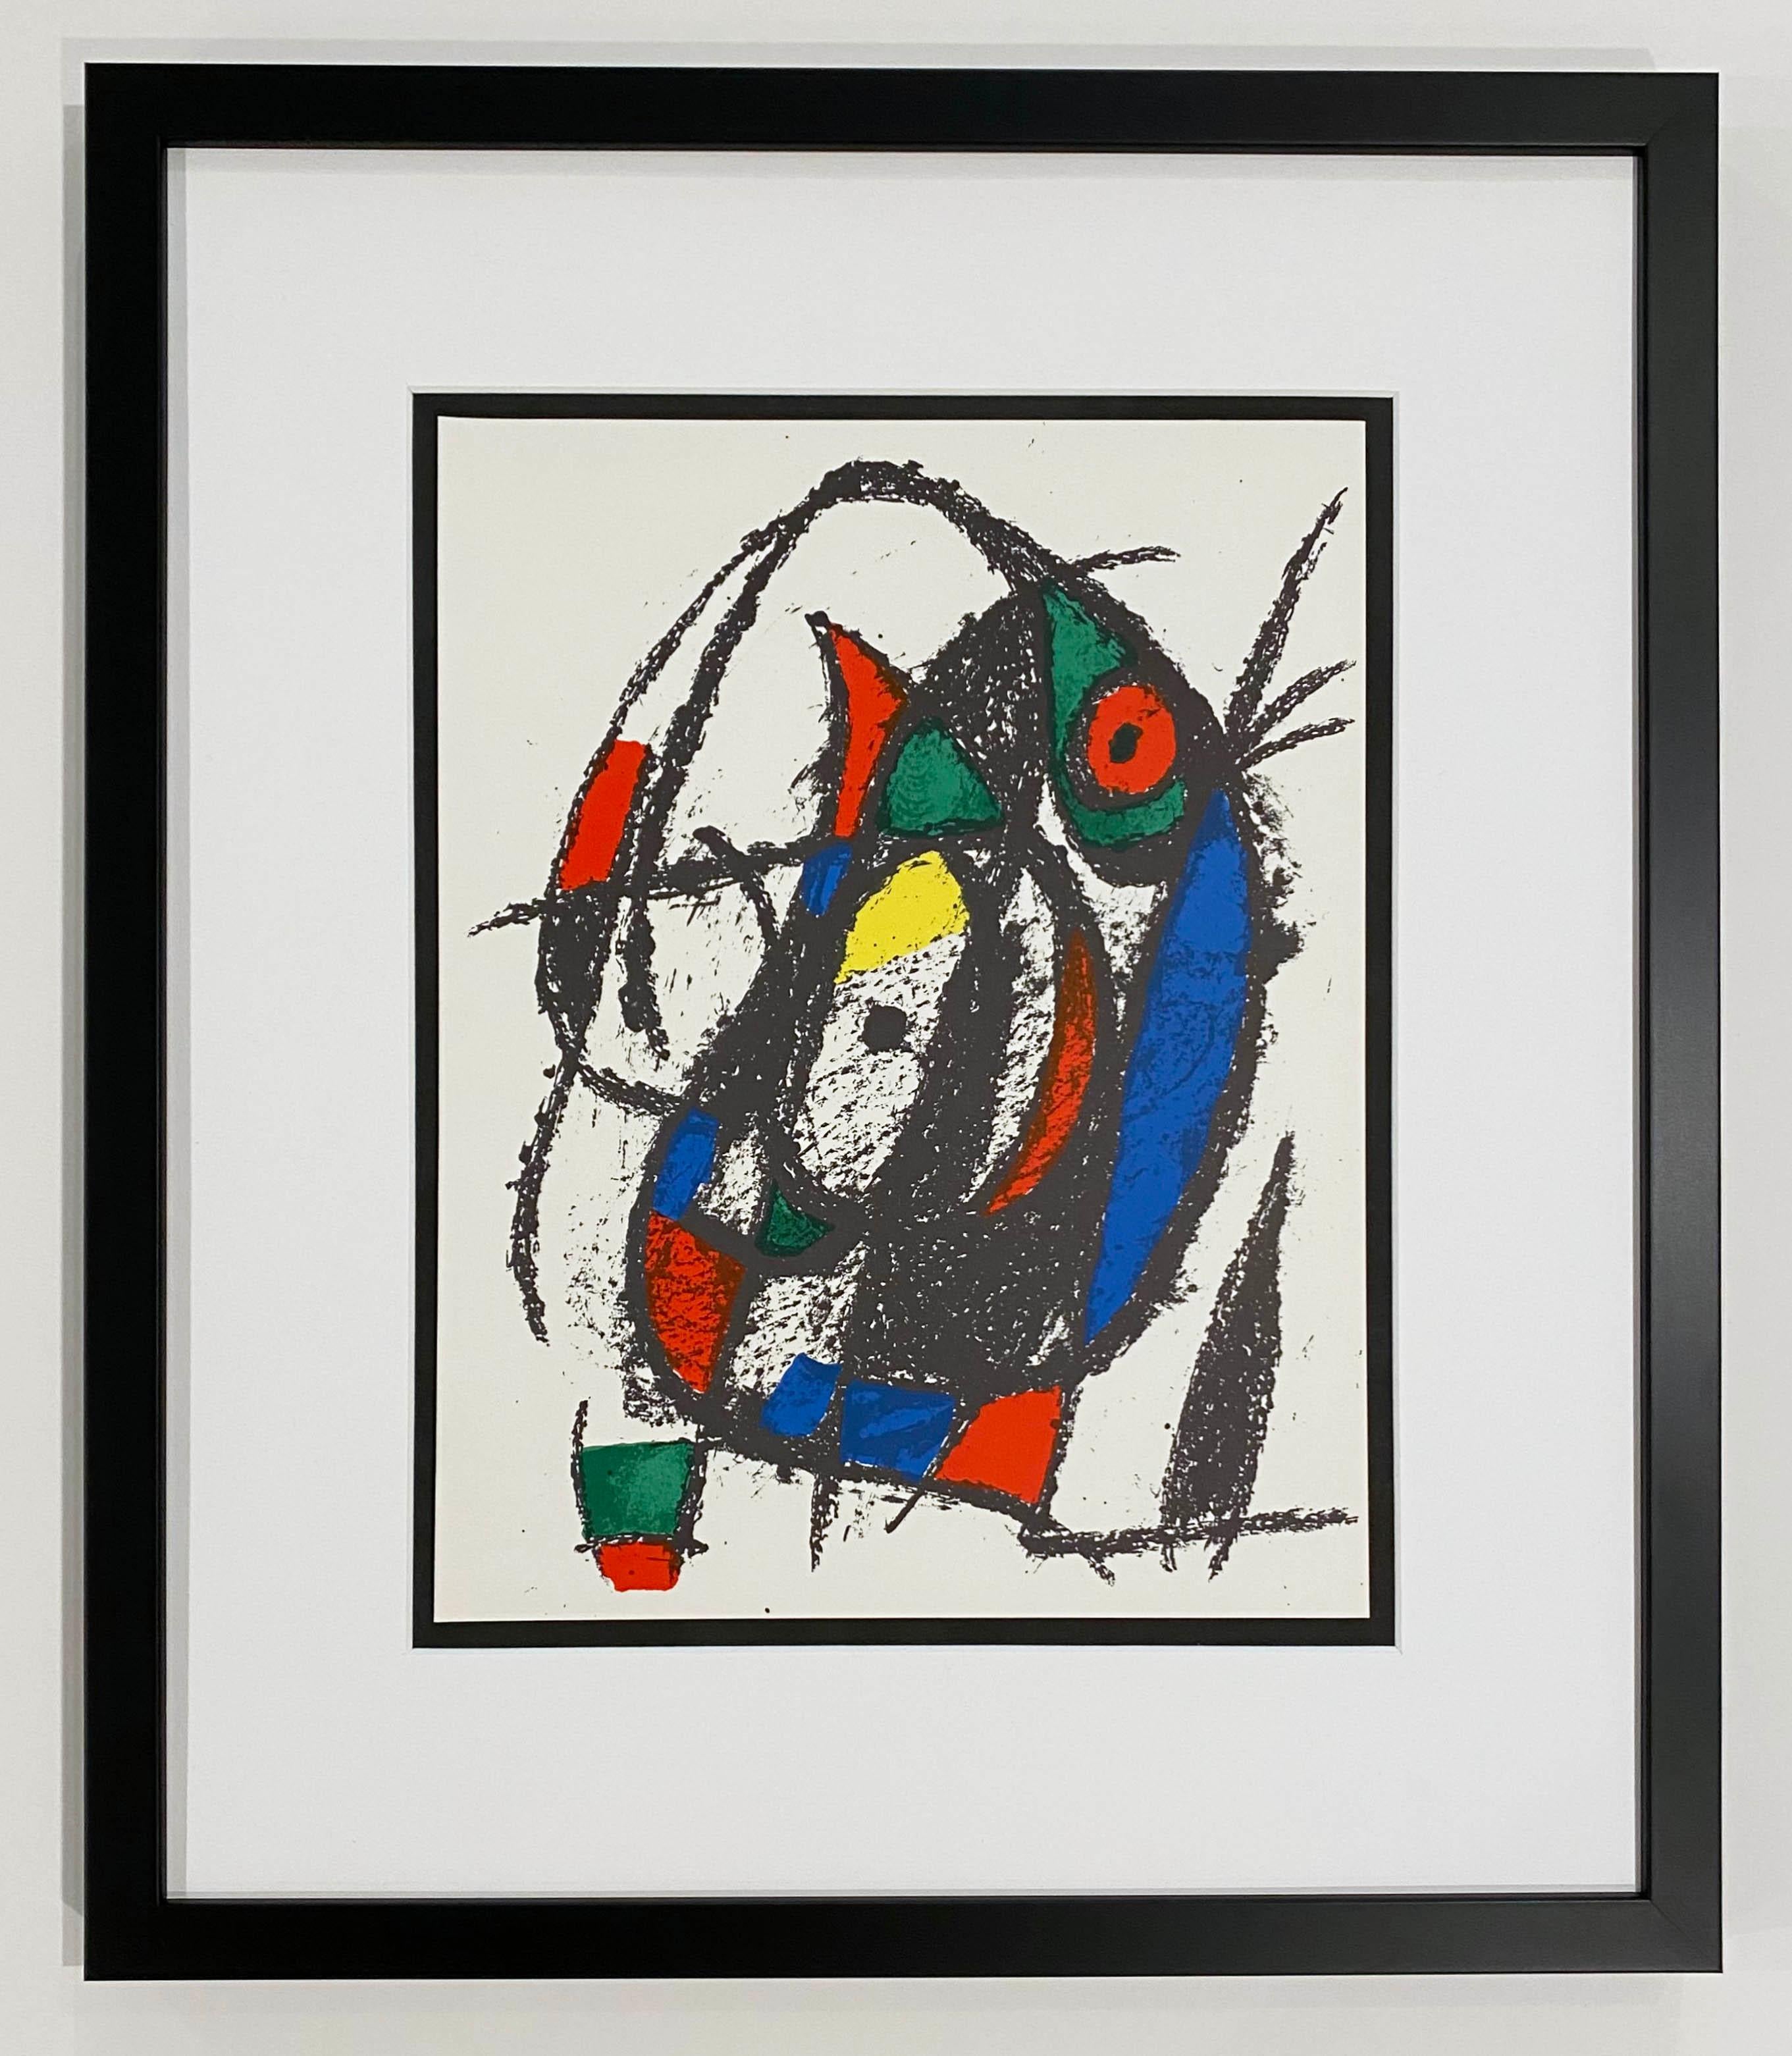 Plate IV, from Lithographe II - Print by Joan Miró